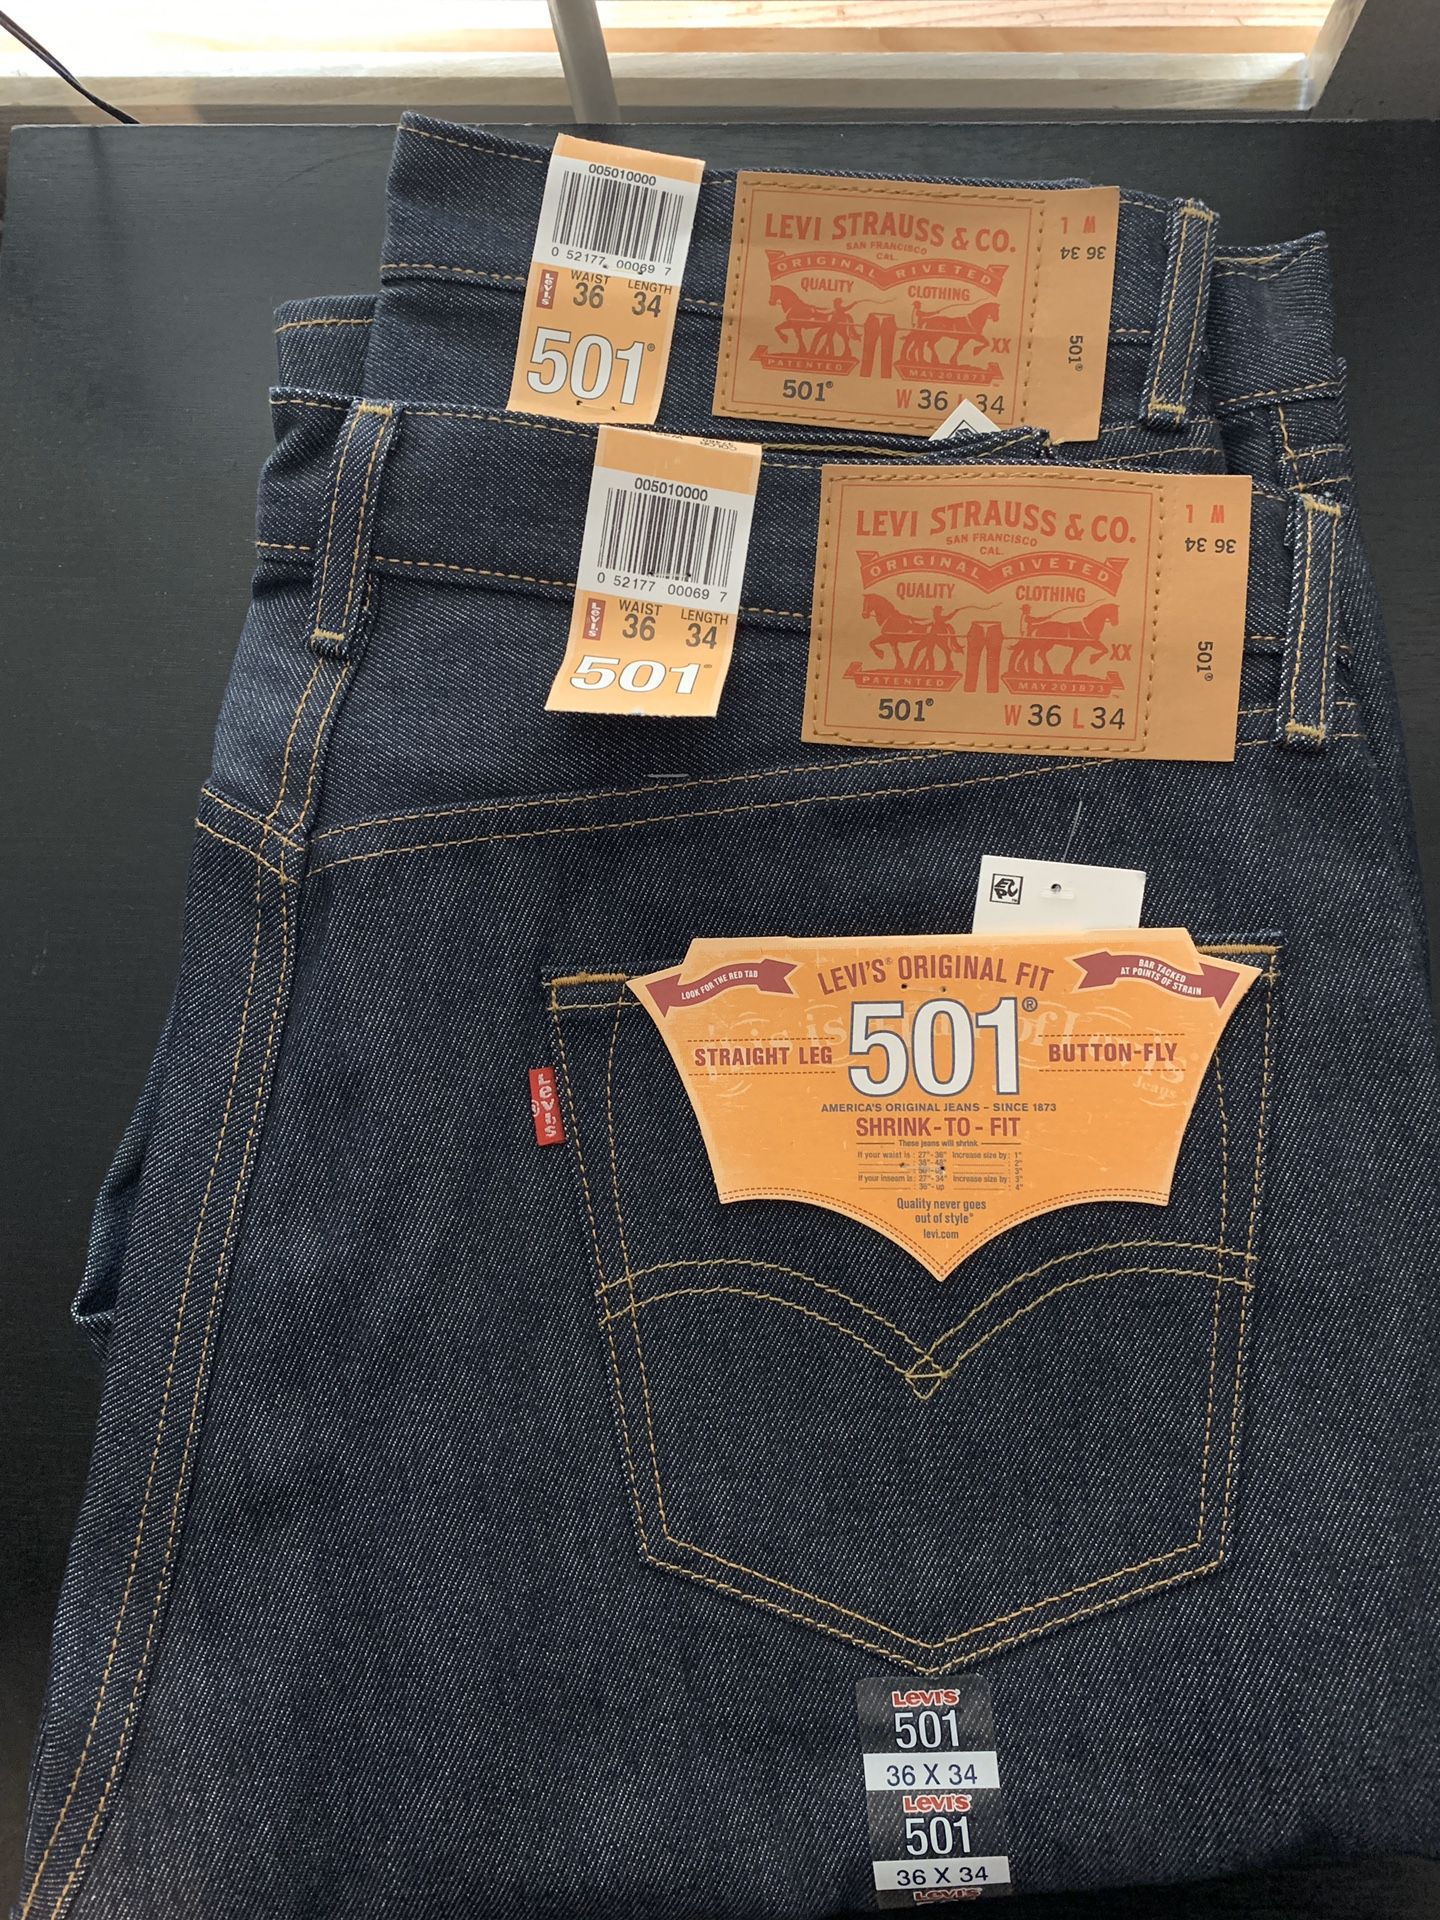 Two Levi's 501 shrink to fit jeans for Sale in Santa Ana, CA - OfferUp